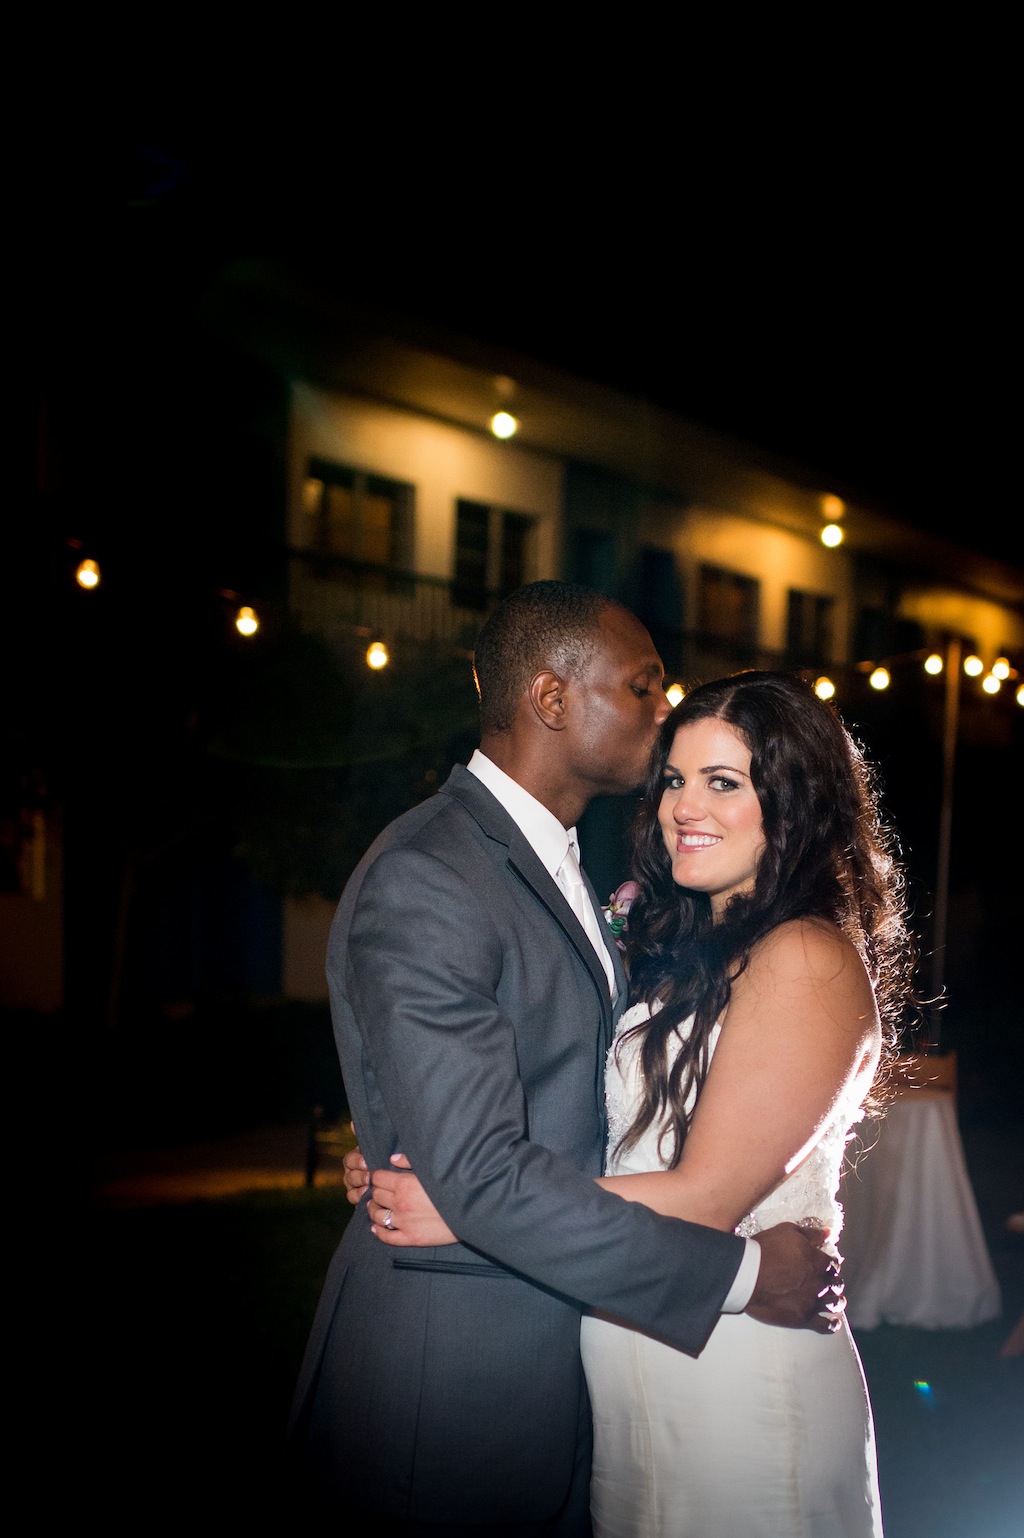 Post Card Inn Wedding St. Pete Beach - In True Colors Photography - Pink, Ivory and White Beachfront Nigerian Wedding (41)